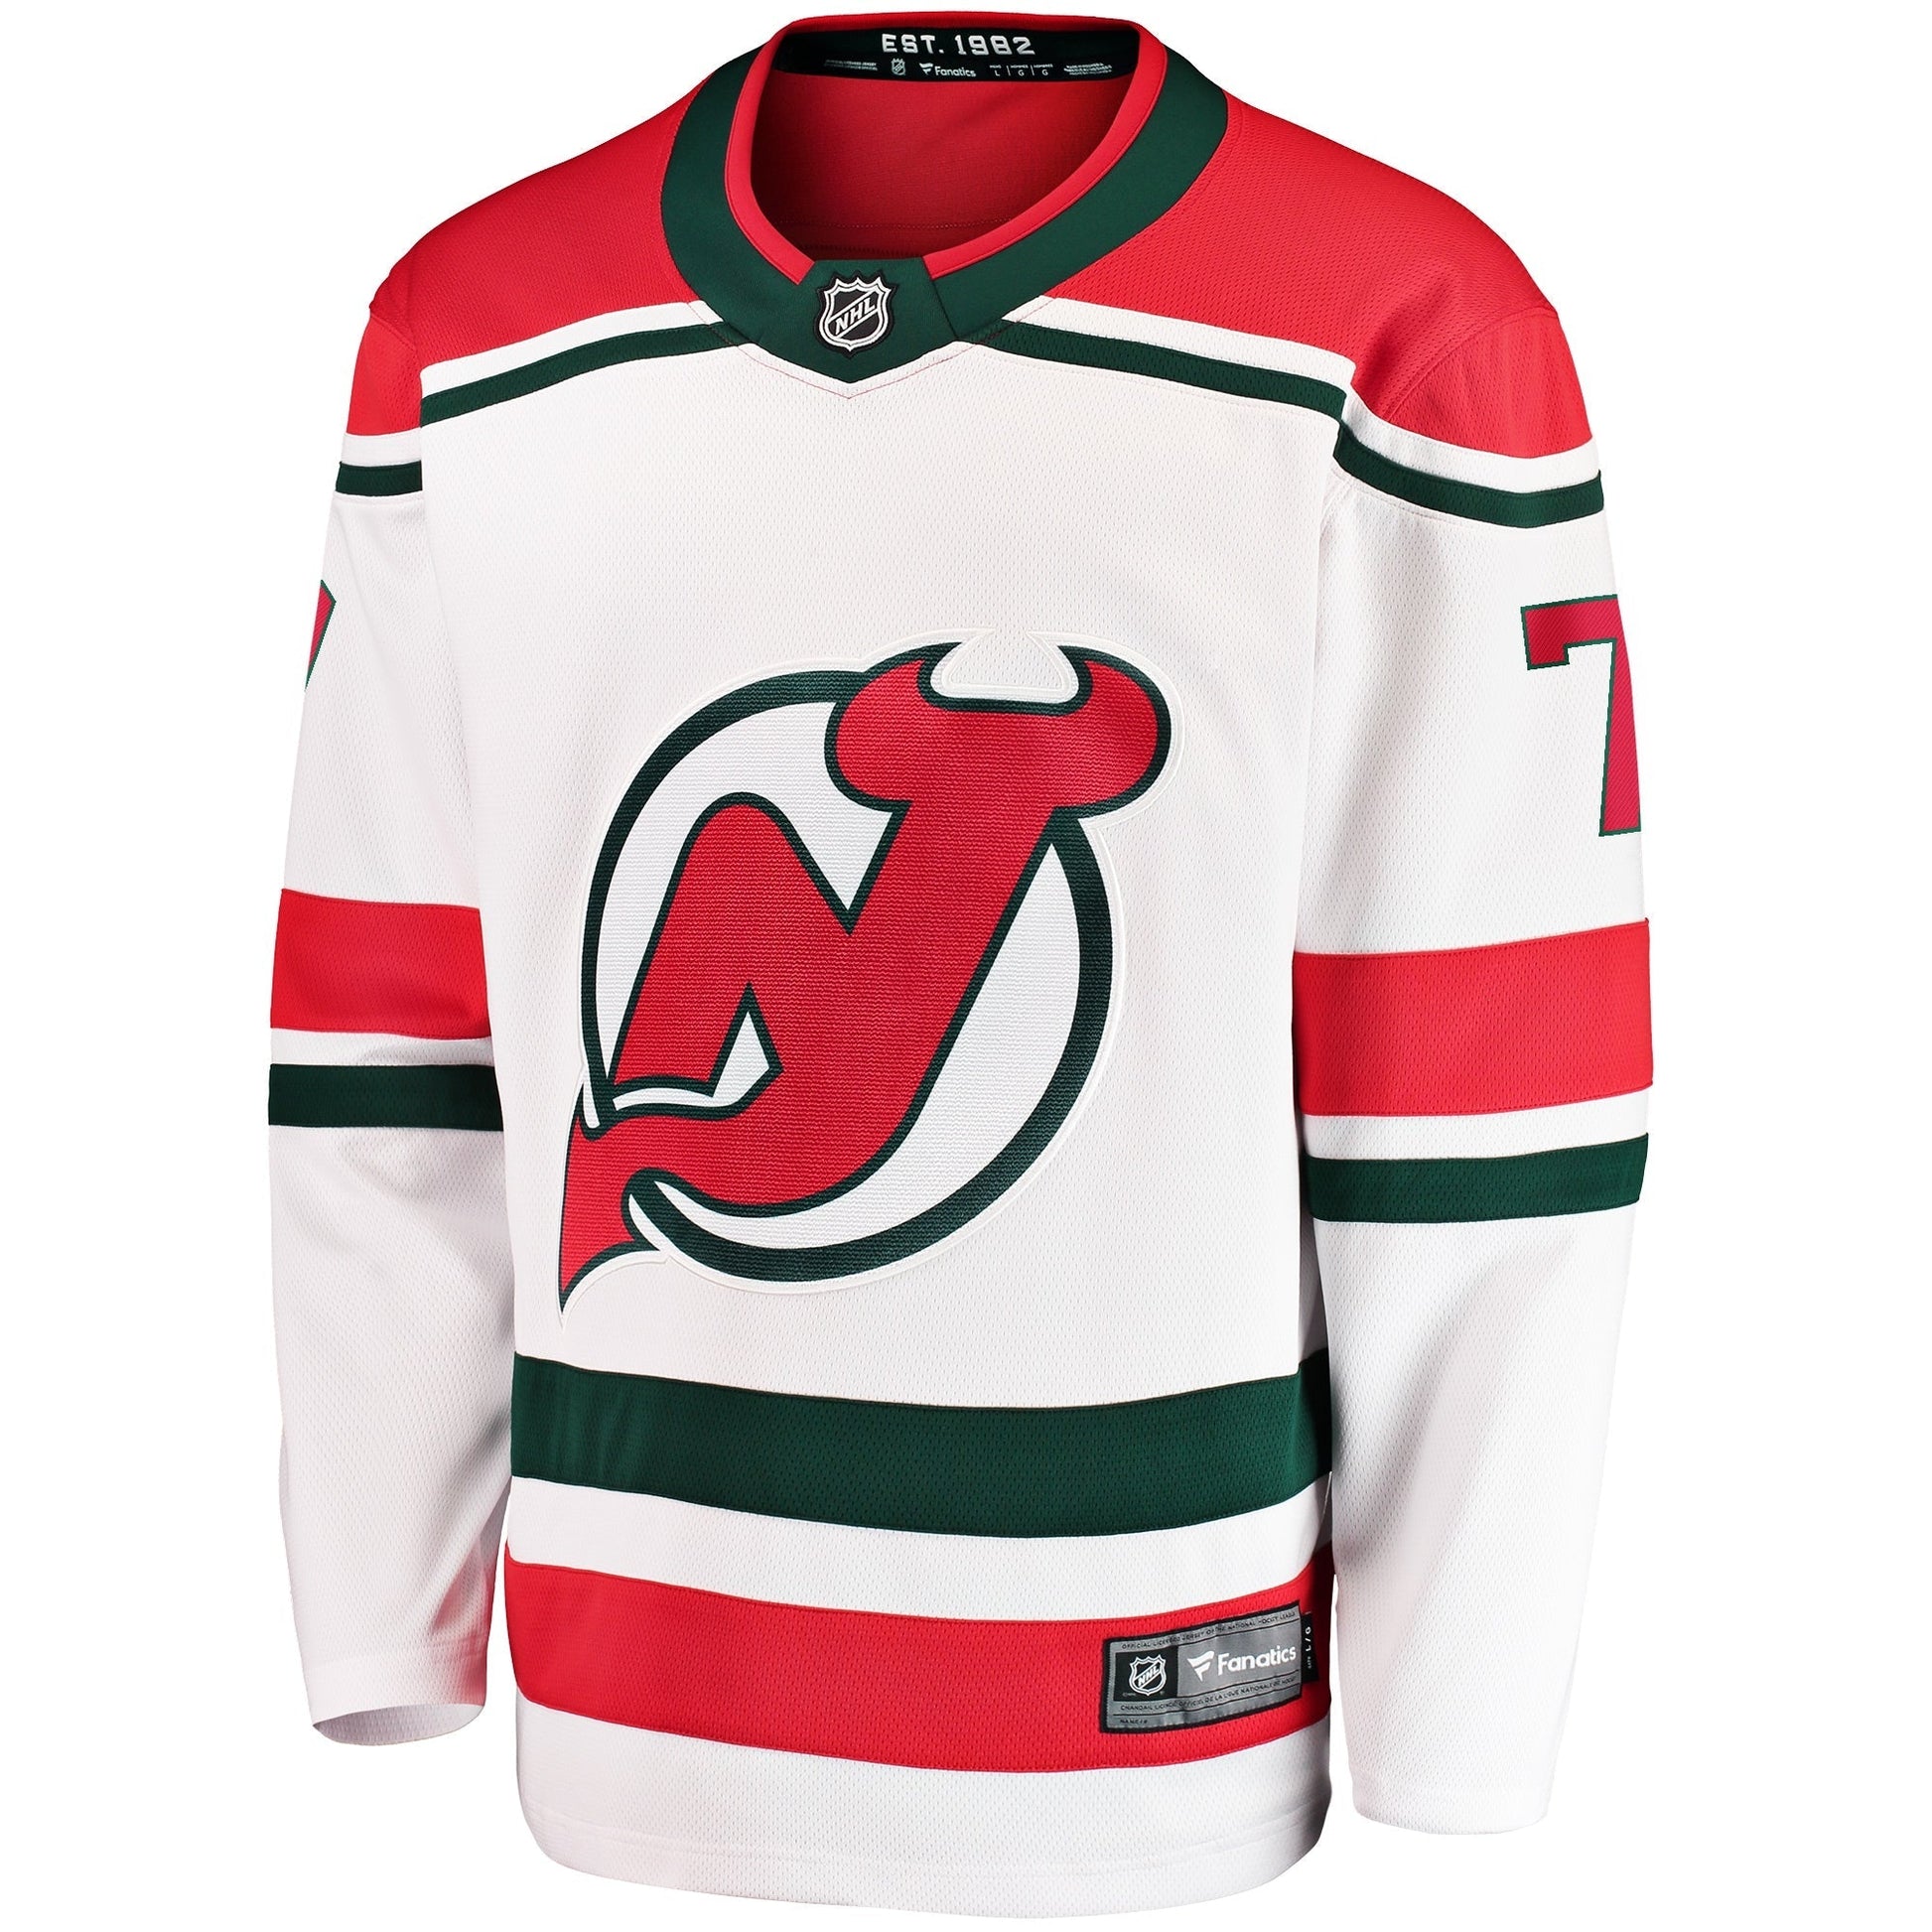 NHL New Jersey Devils Long Sleeve Shirt Men's Red Size XL